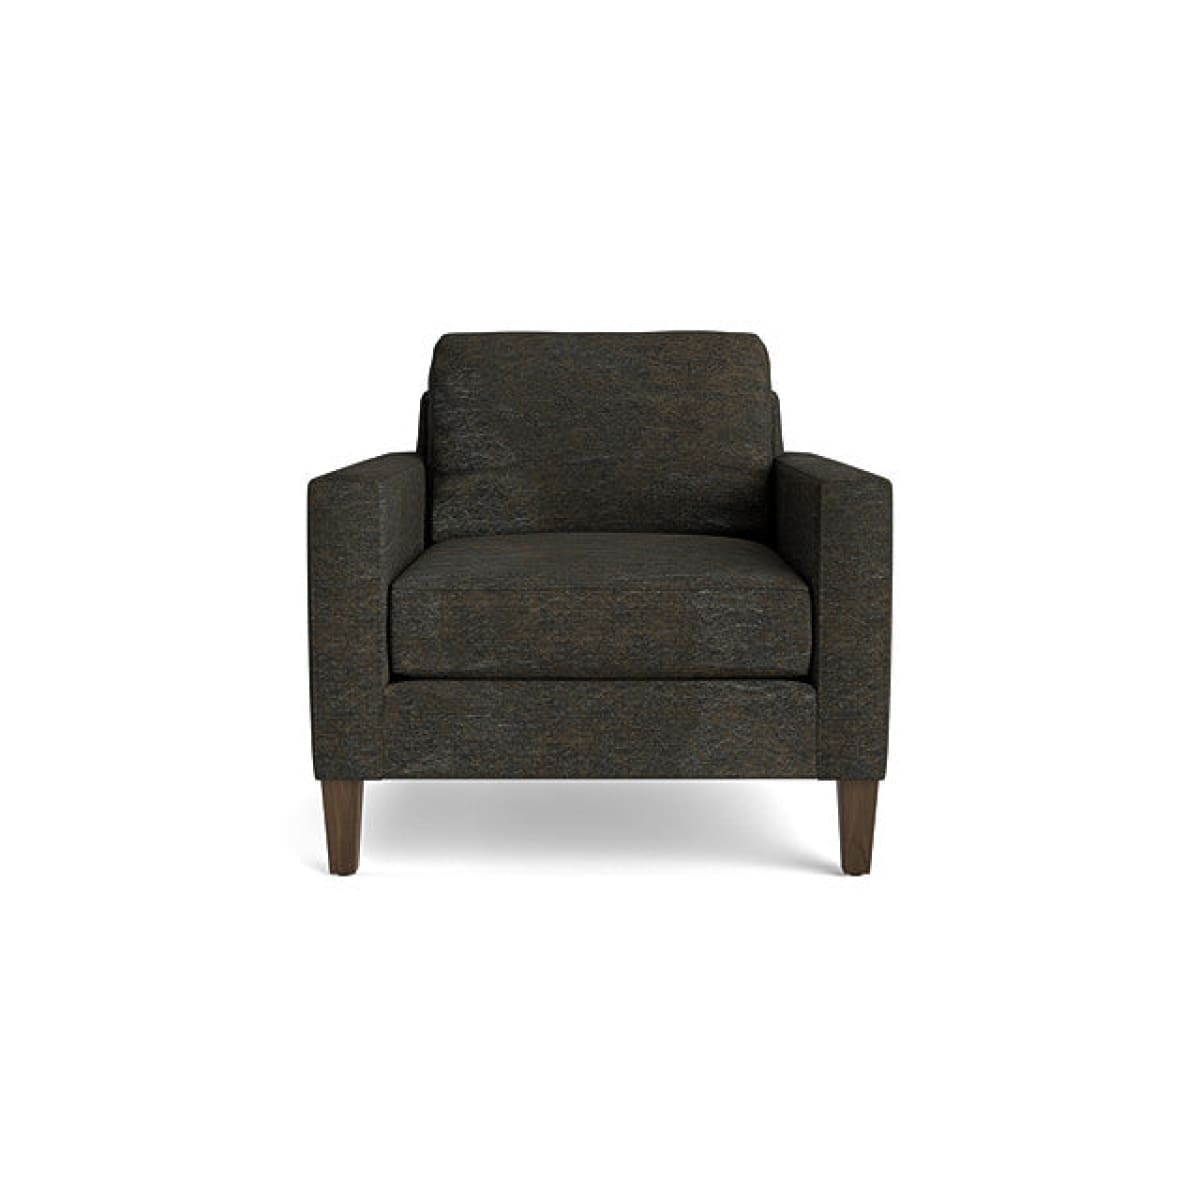 Kent Accent Chair - Palance Steel